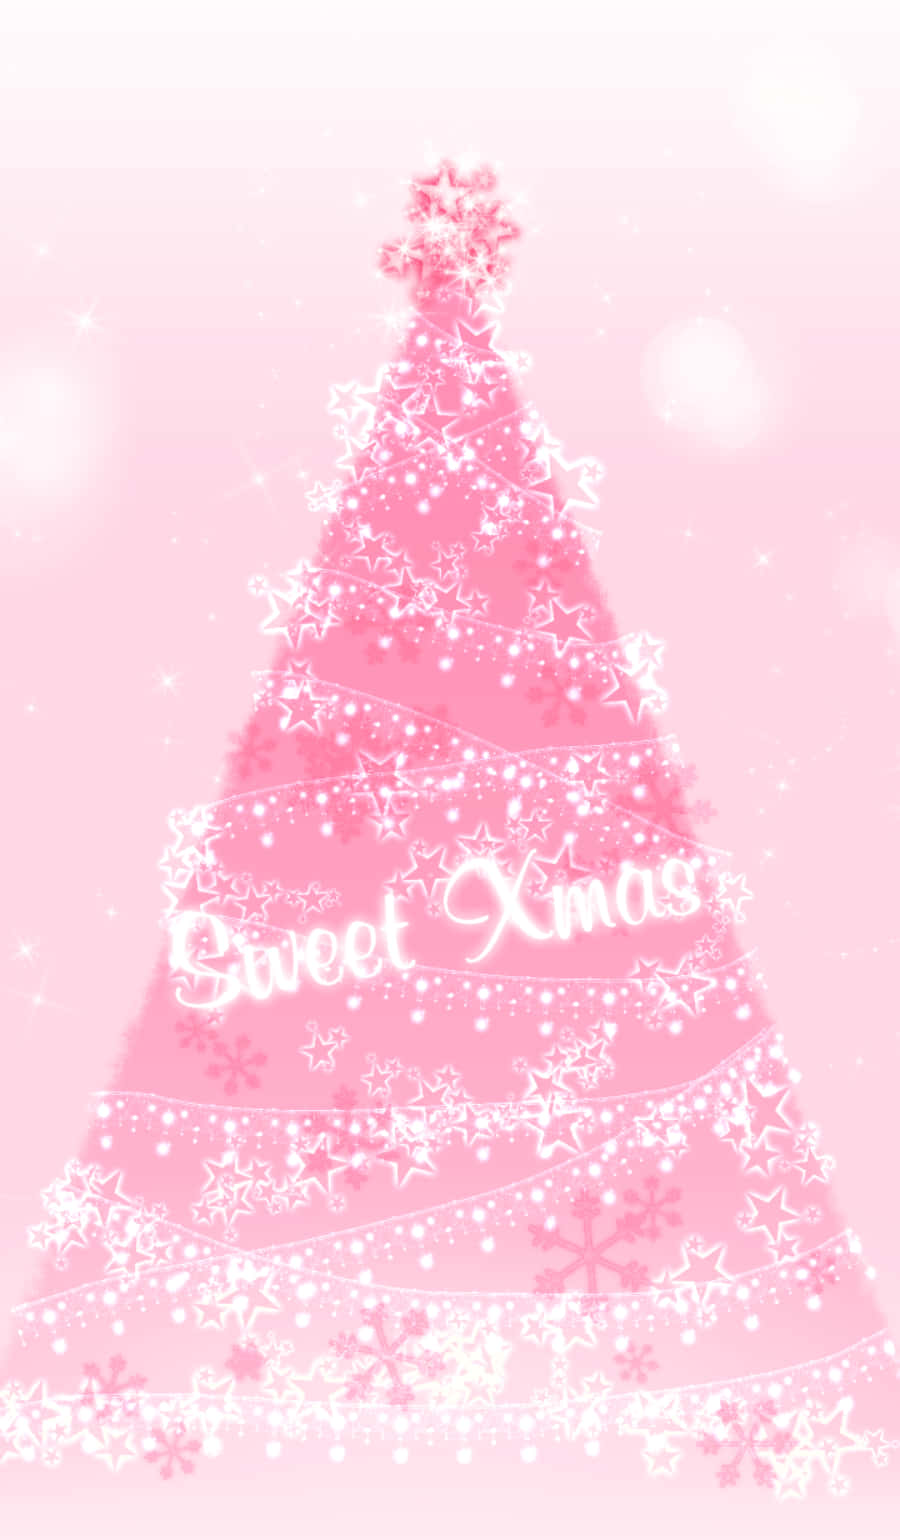 Celebrate the Festive Season in Style with This Cute Pink Christmas Tree Wallpaper